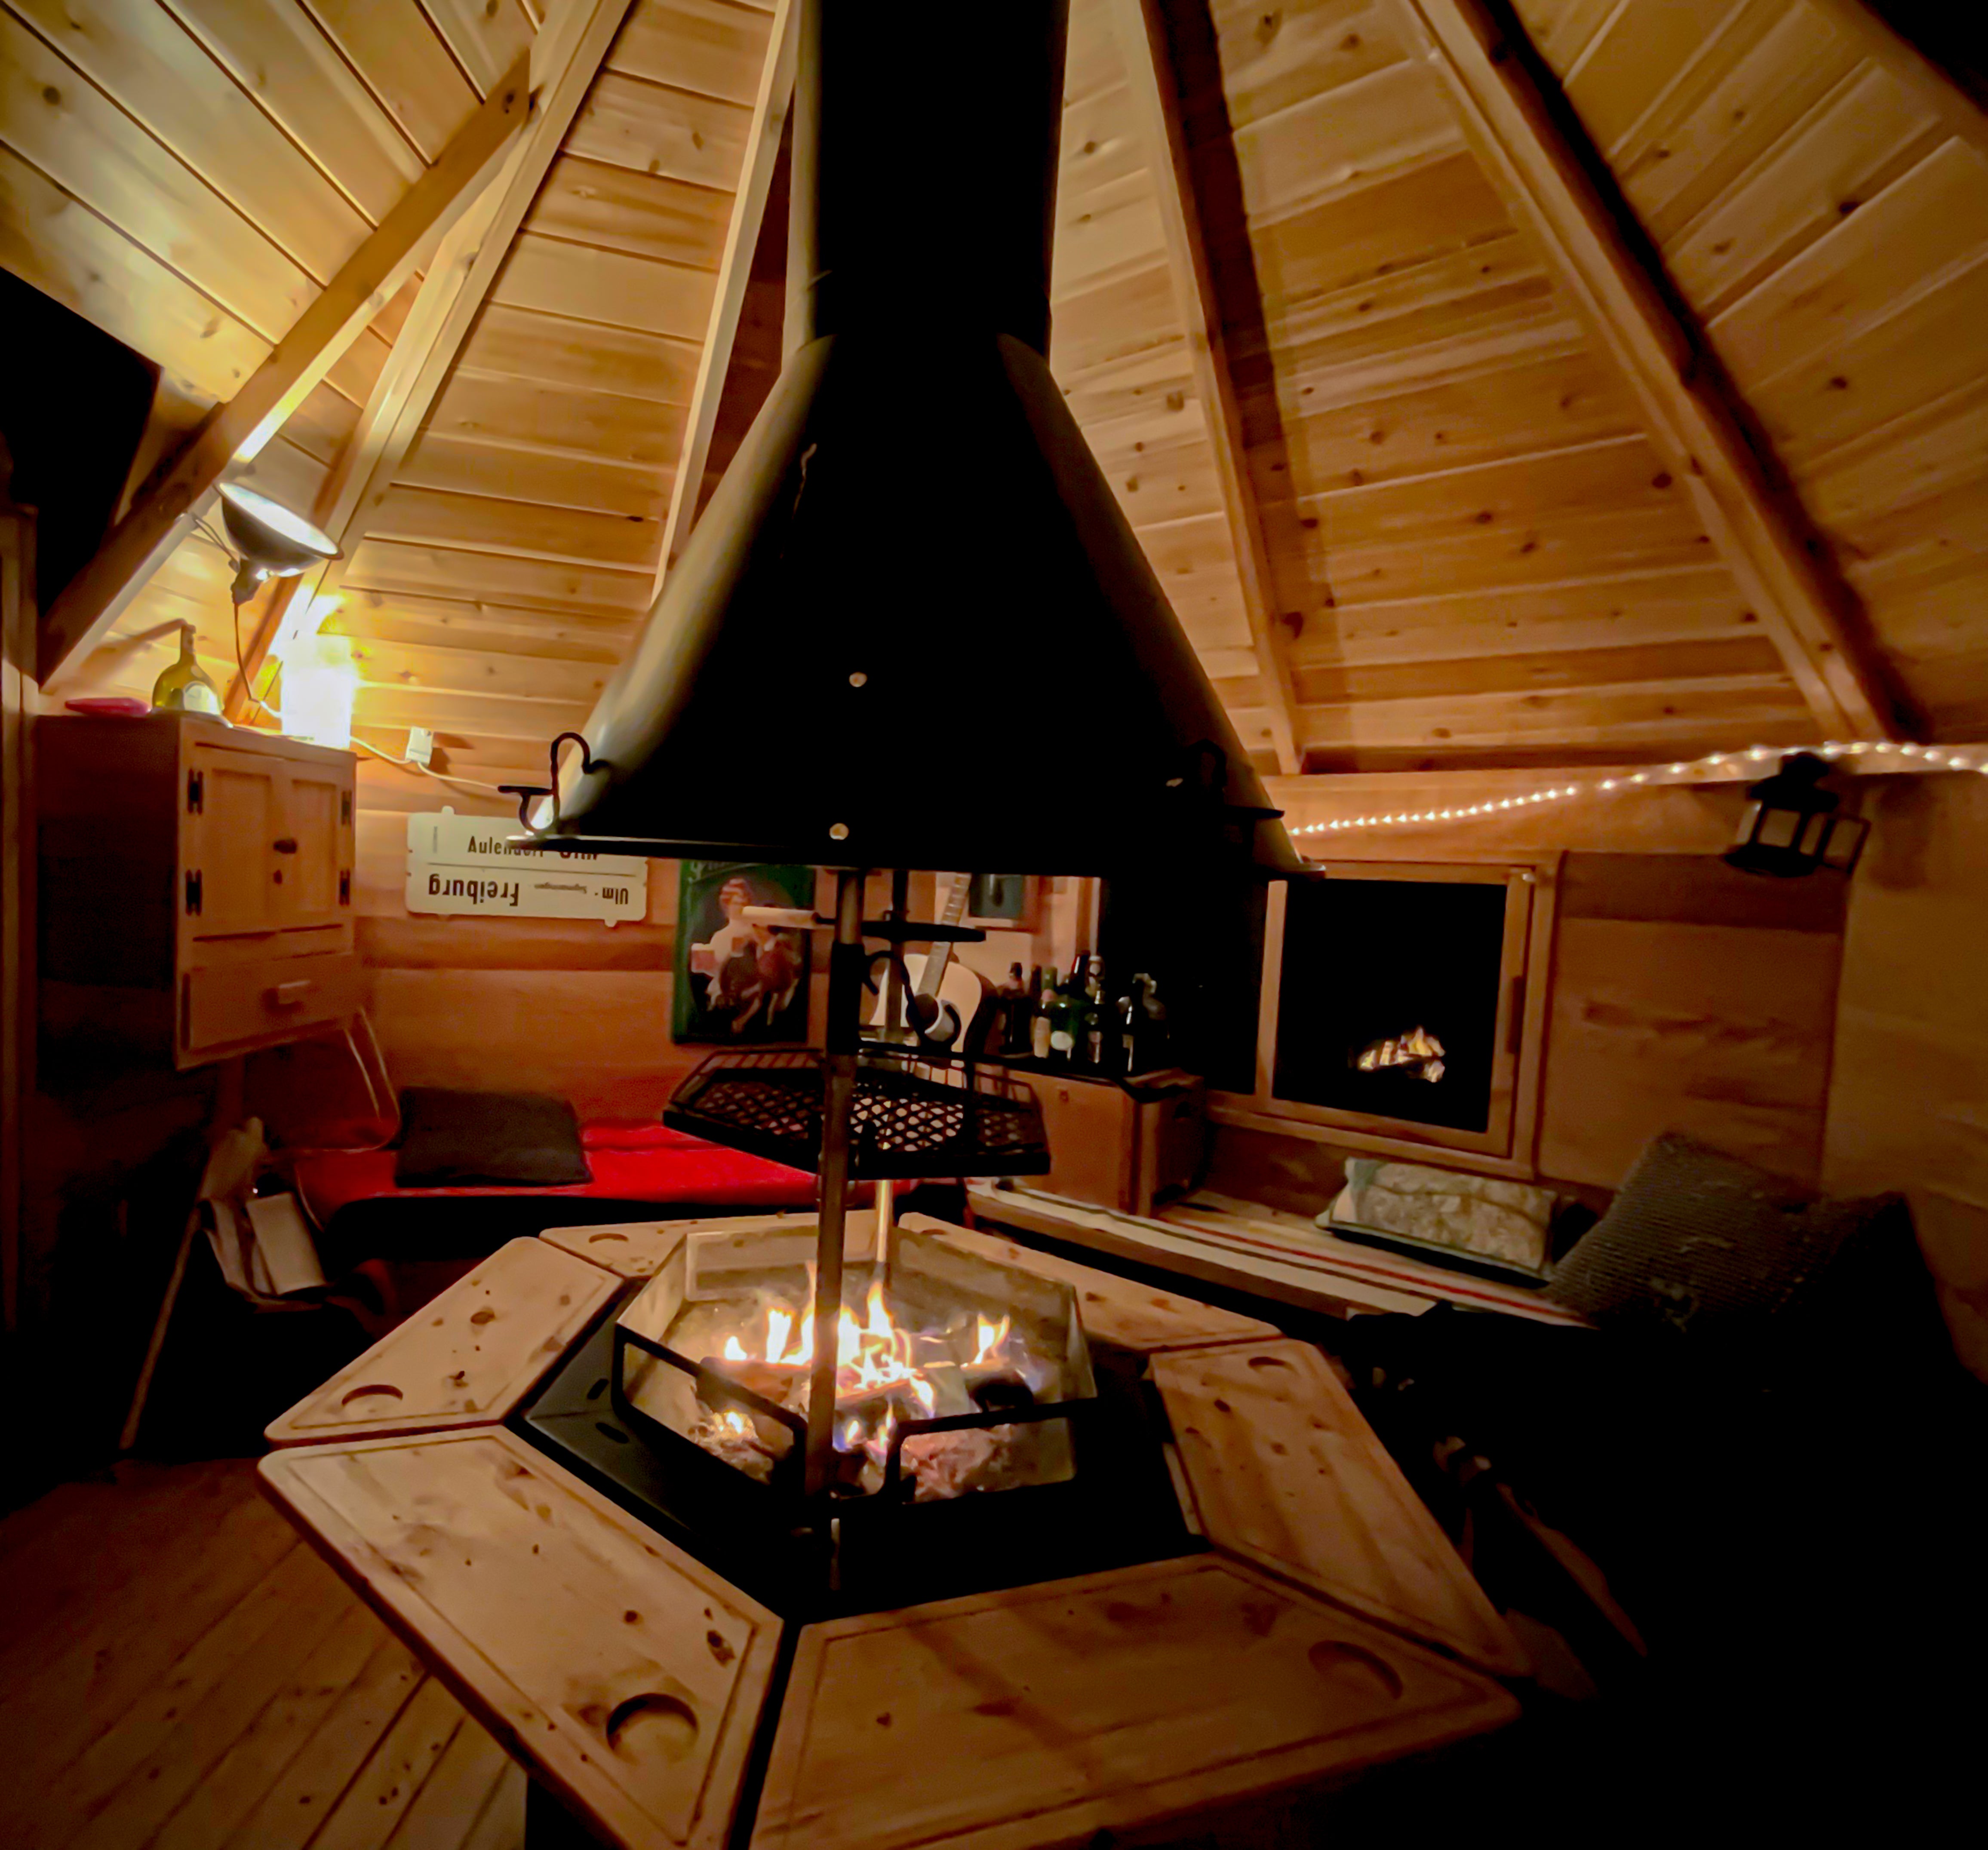     Fire and smoke rising through the chimney in the ceiling of the Cabin. Lights line the red cedar walls and pillows cover the wooden benches.   